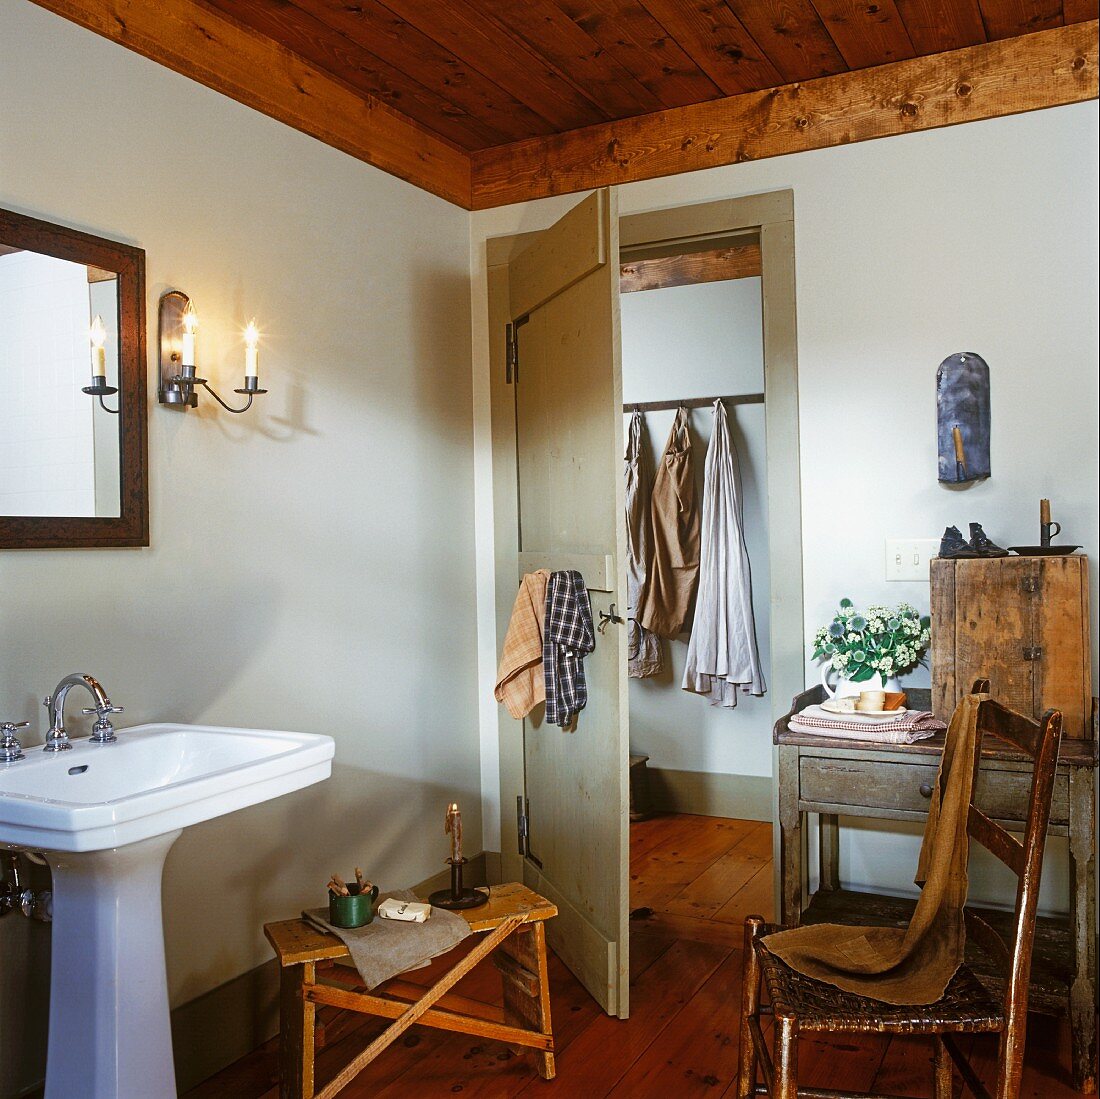 Simple bathroom with pedestal washbasin and antique furnishings